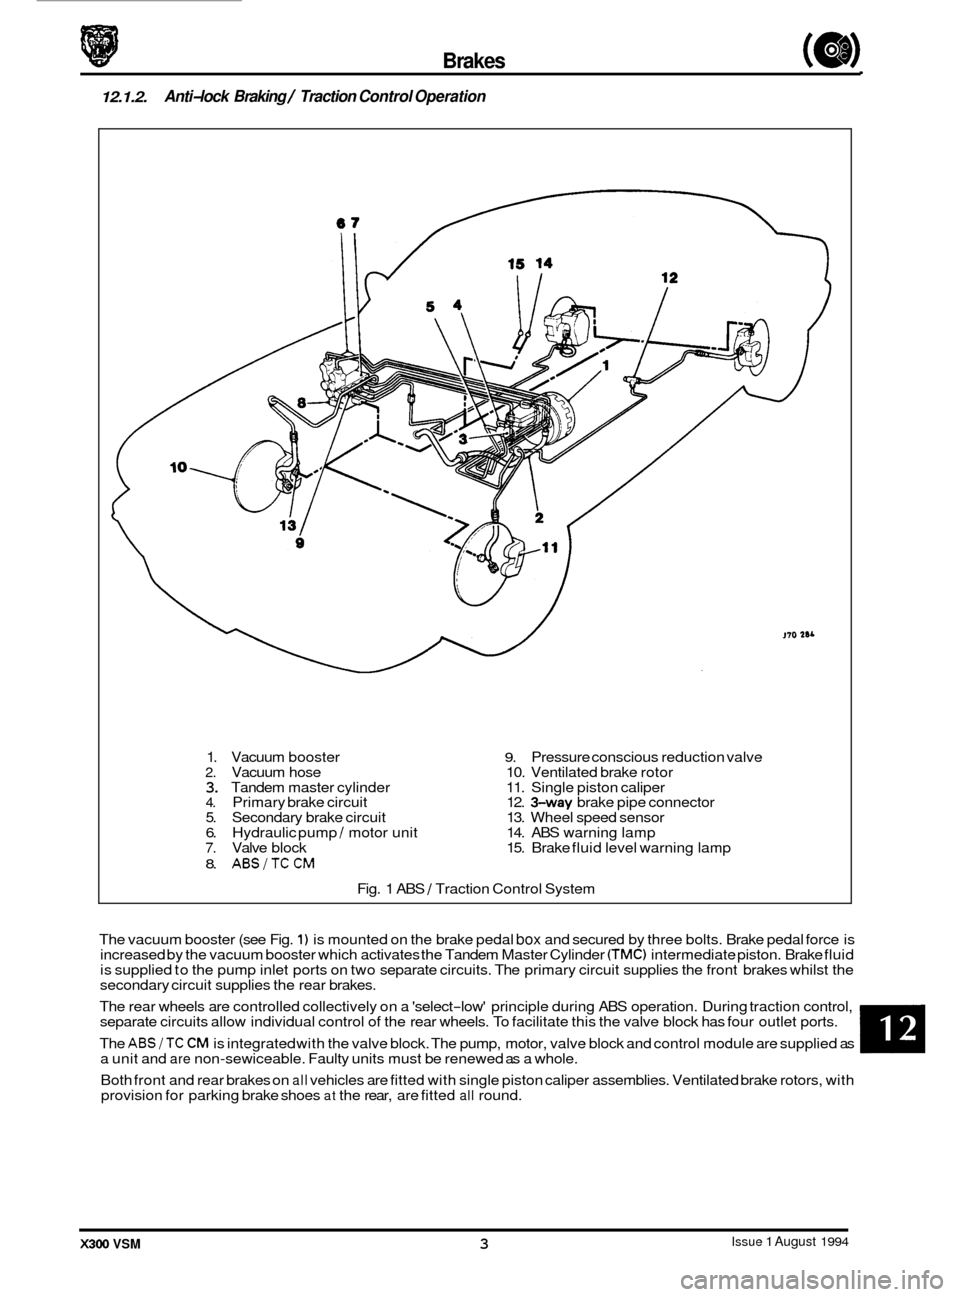 JAGUAR XJ6 1994 2.G User Guide Brakes (a) 
12.1.2. Anti-lock Braking / Traction  Control Operation 
The rear  wheels  are controlled collectively  on a select-low  principle during  ABS operation.  During traction  control, 
sepa